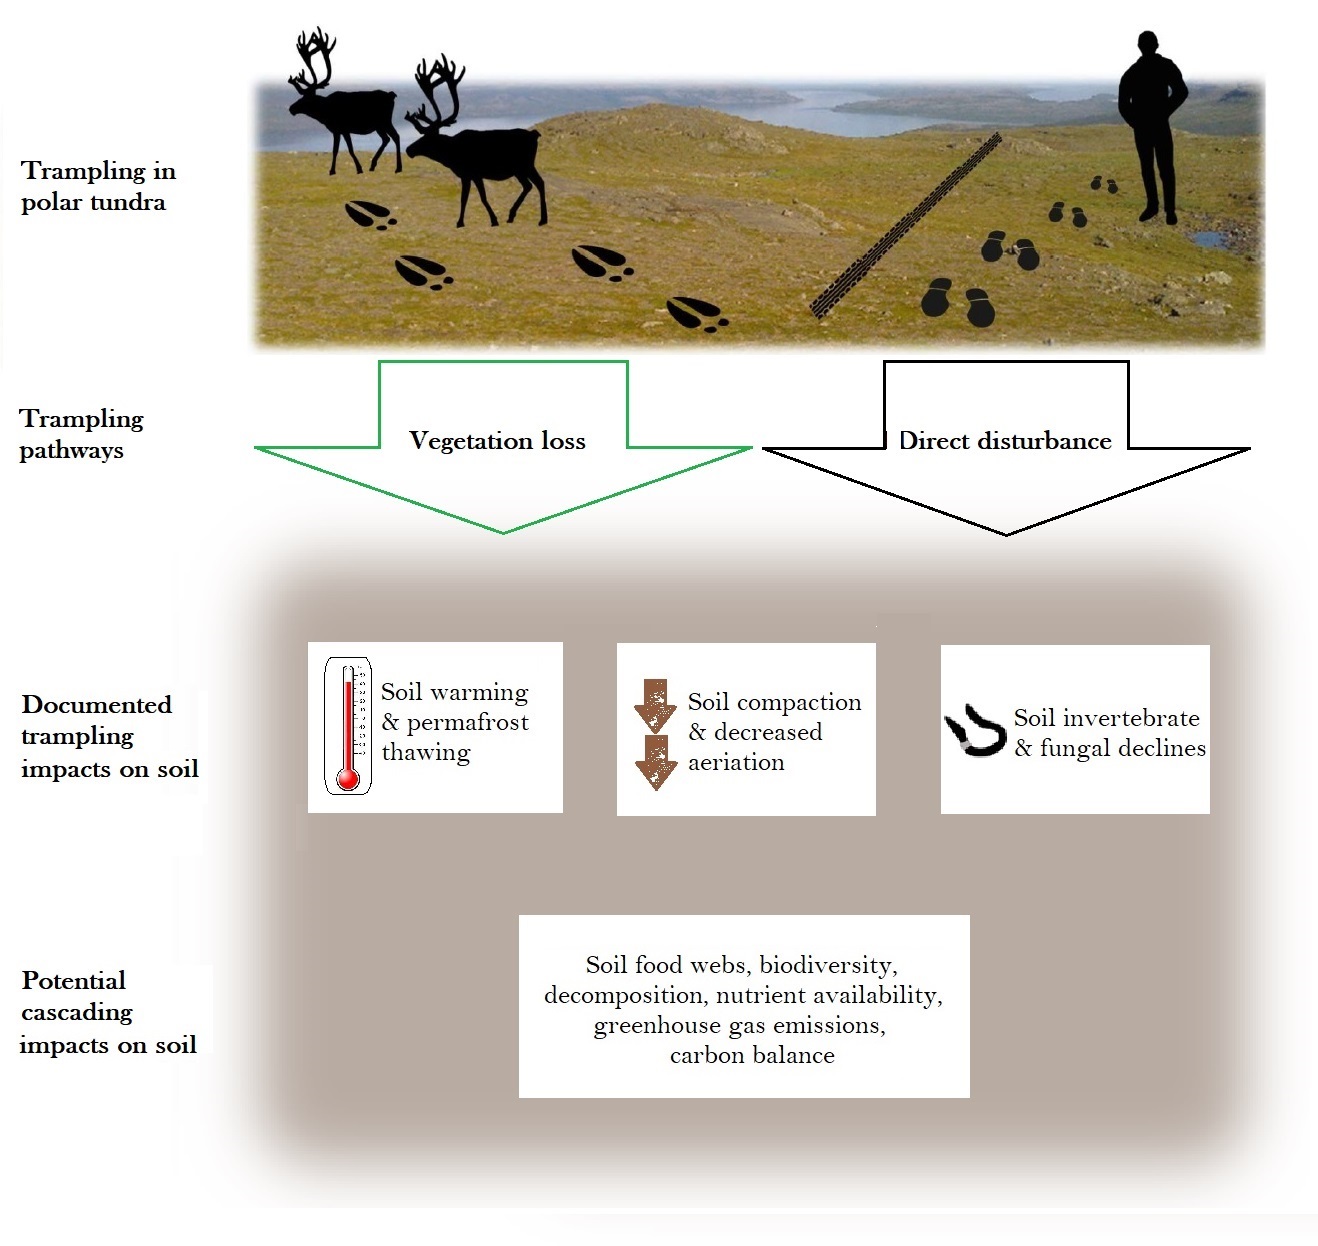 Trampling by large animals and human activities shape polar tundra soils.